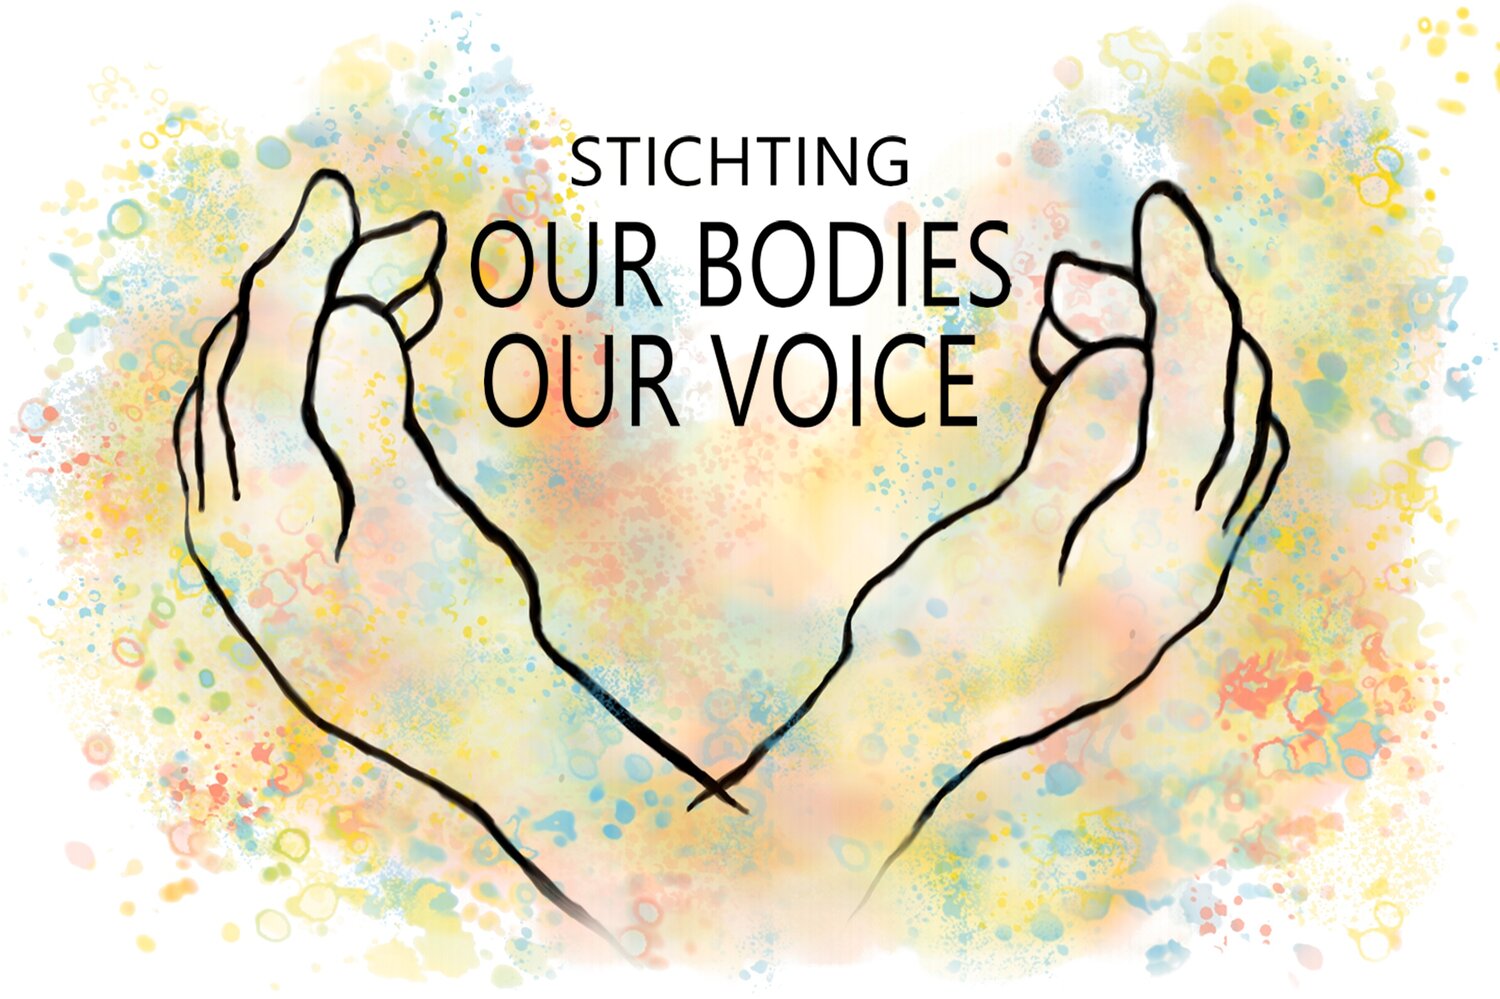 Stichting Our Bodies Our Voice